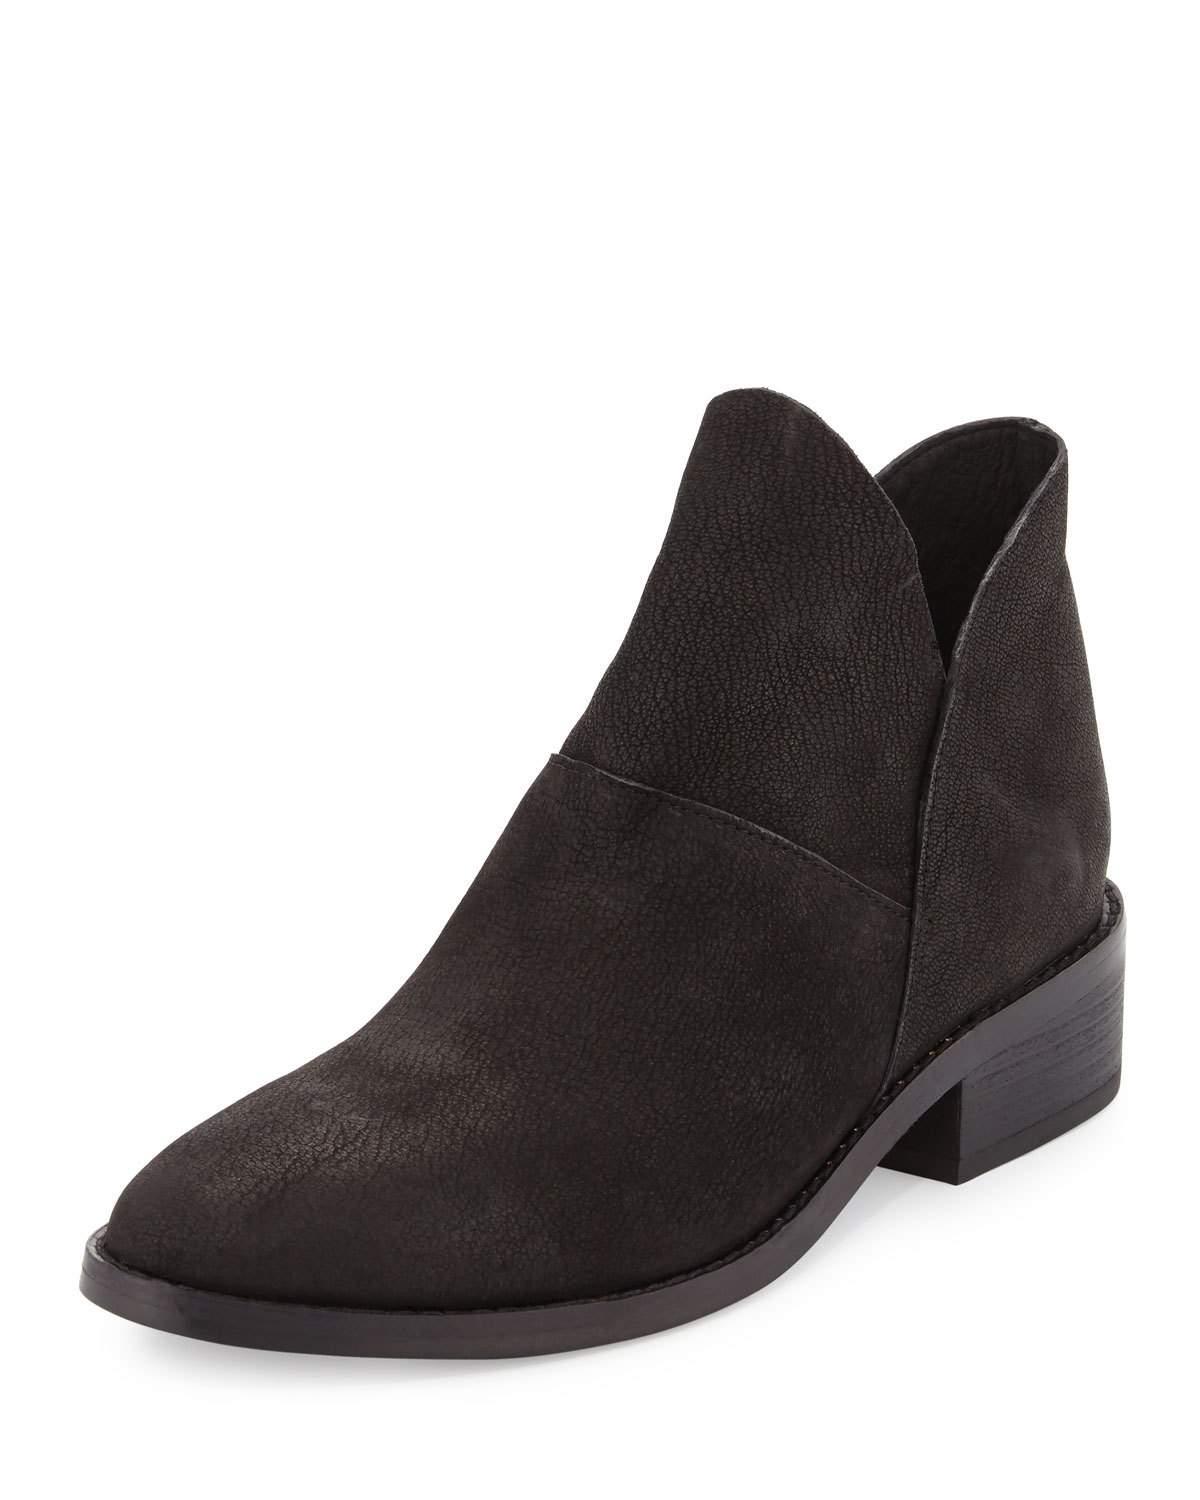 Eileen Fisher Leather Leaf Nubuck Ankle Boots in Black (Brown) - Lyst